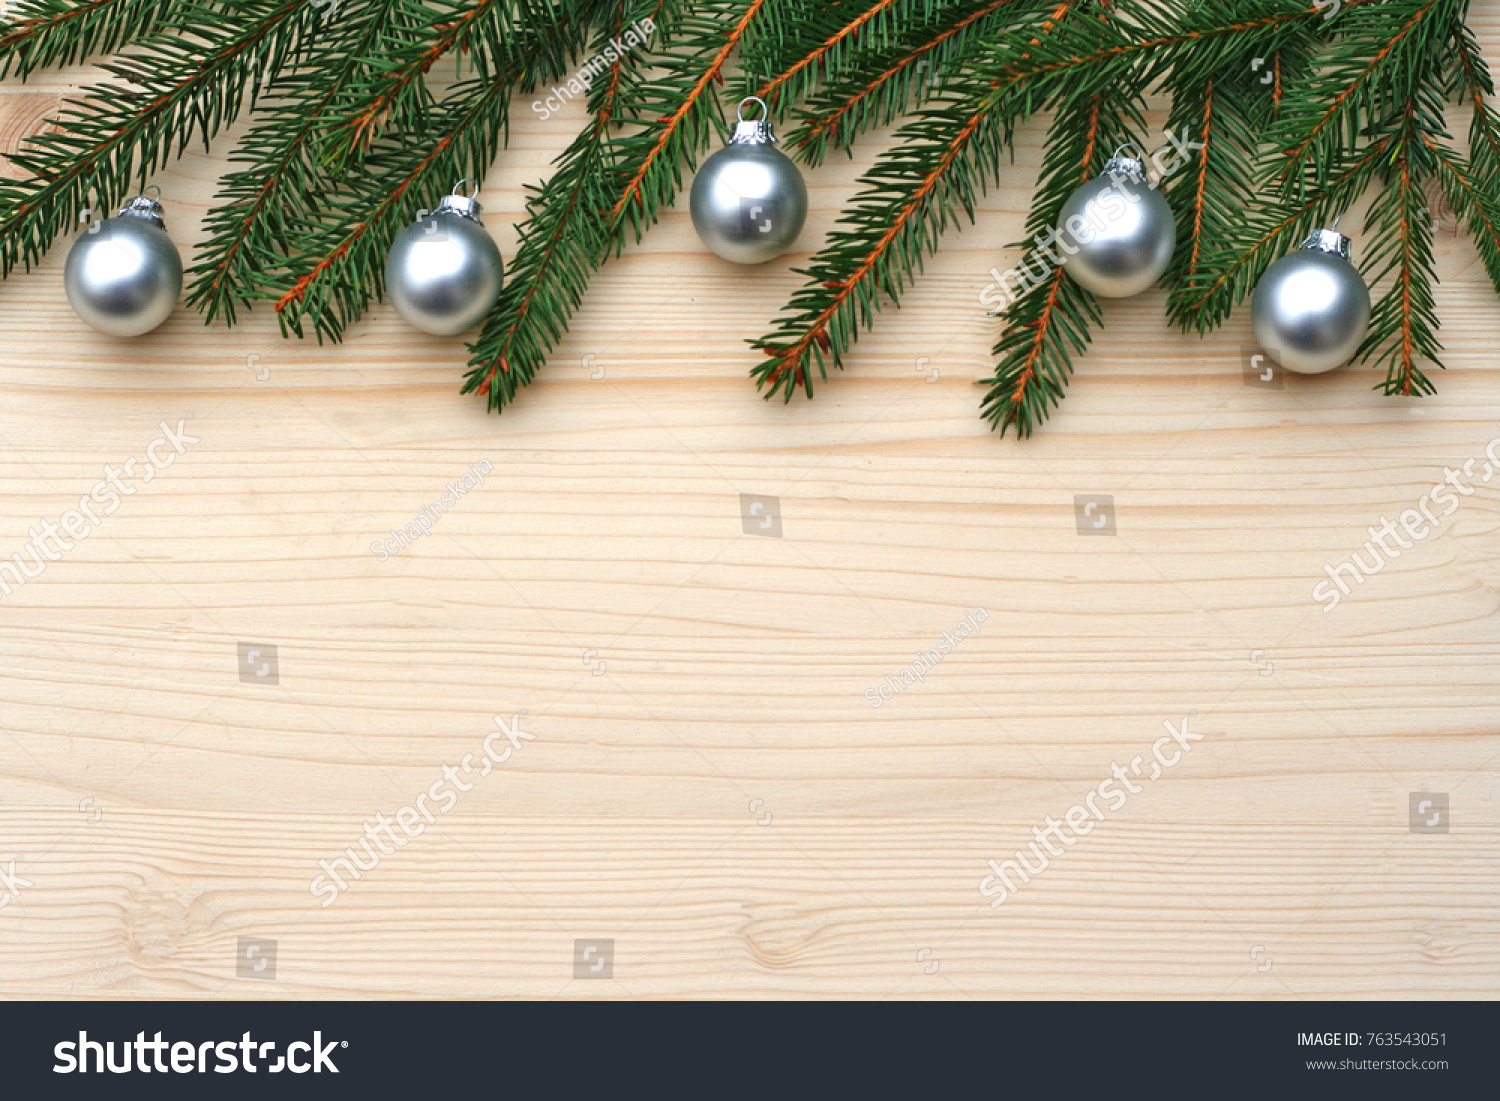 vintage Christmas background with fir branches and silver balls on wood #763543051